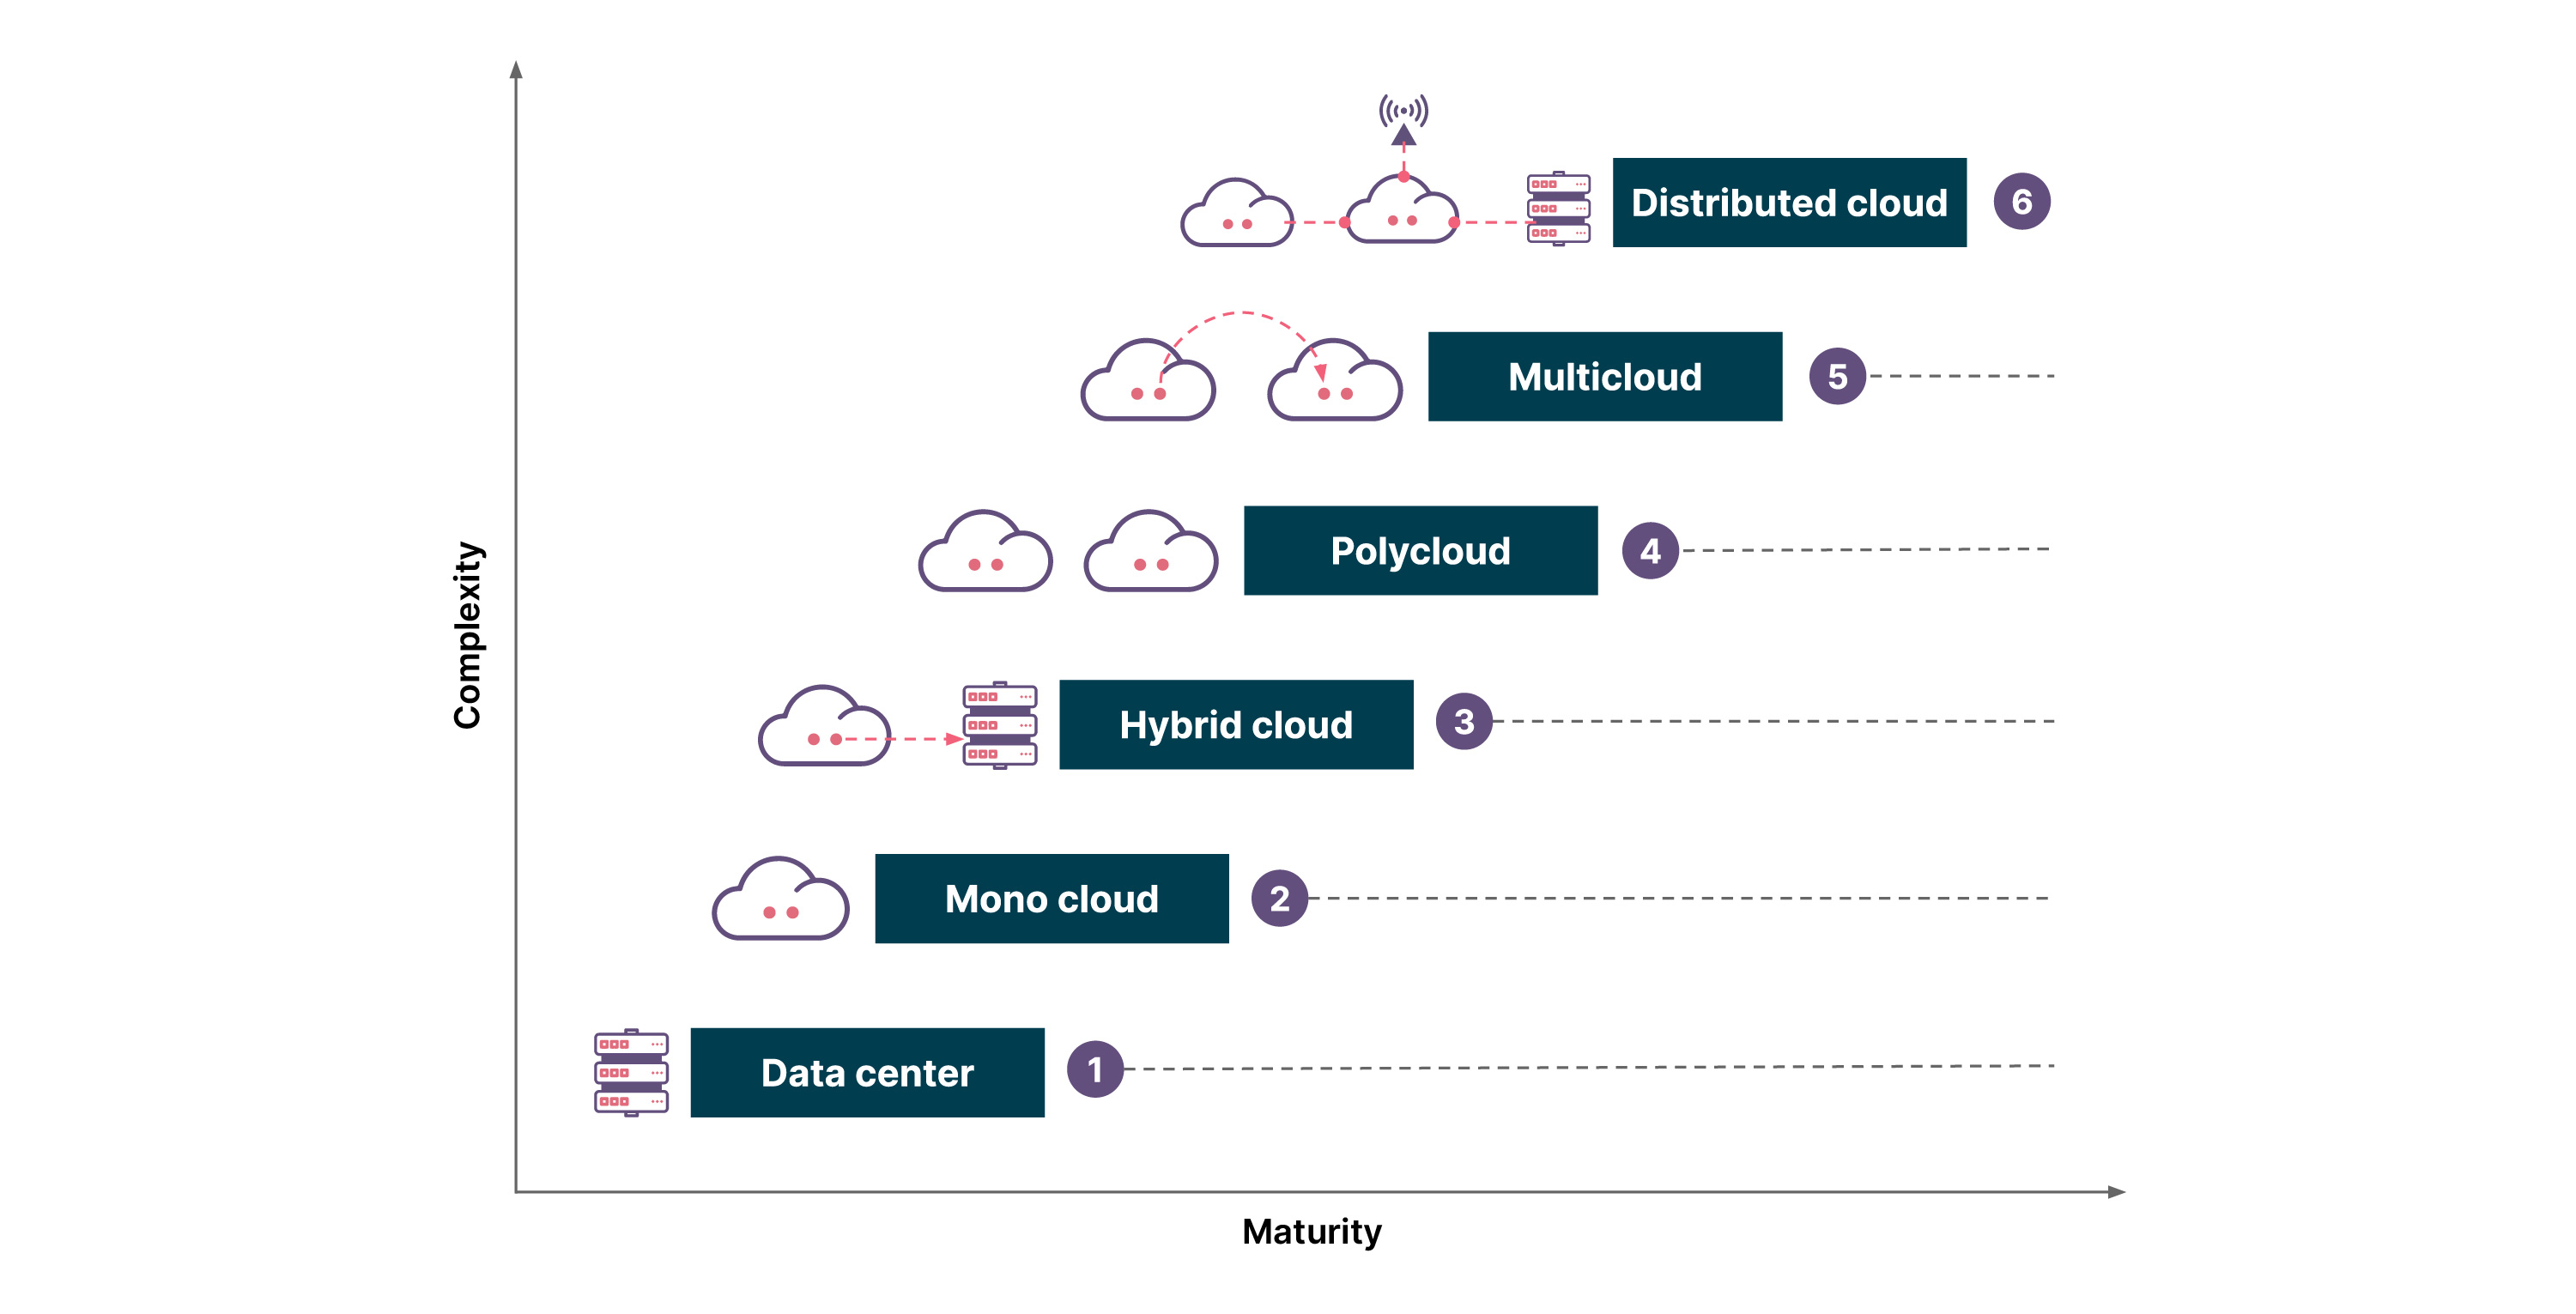 In above cloud adoption journey, X-axis represent maturity of adoption and Y-axis represents the complexity of the programs. As organizations move through this journey, the complexity of cloud adoption steadily increases starting from data center to distributed cloud. In the graph, data center, mono cloud to hybrid cloud, polycloud, multicloud to distributed cloud are marked, 1 to 6 where 1 is the least complex and 6 is the most complex deployment model. On the scale of maturity increases on the cloud adoption matures starting from mono cloud, to hybrid cloud, polycloud, multicloud to distributed cloud, the effort, time and complexity increases multifold along the journey. 